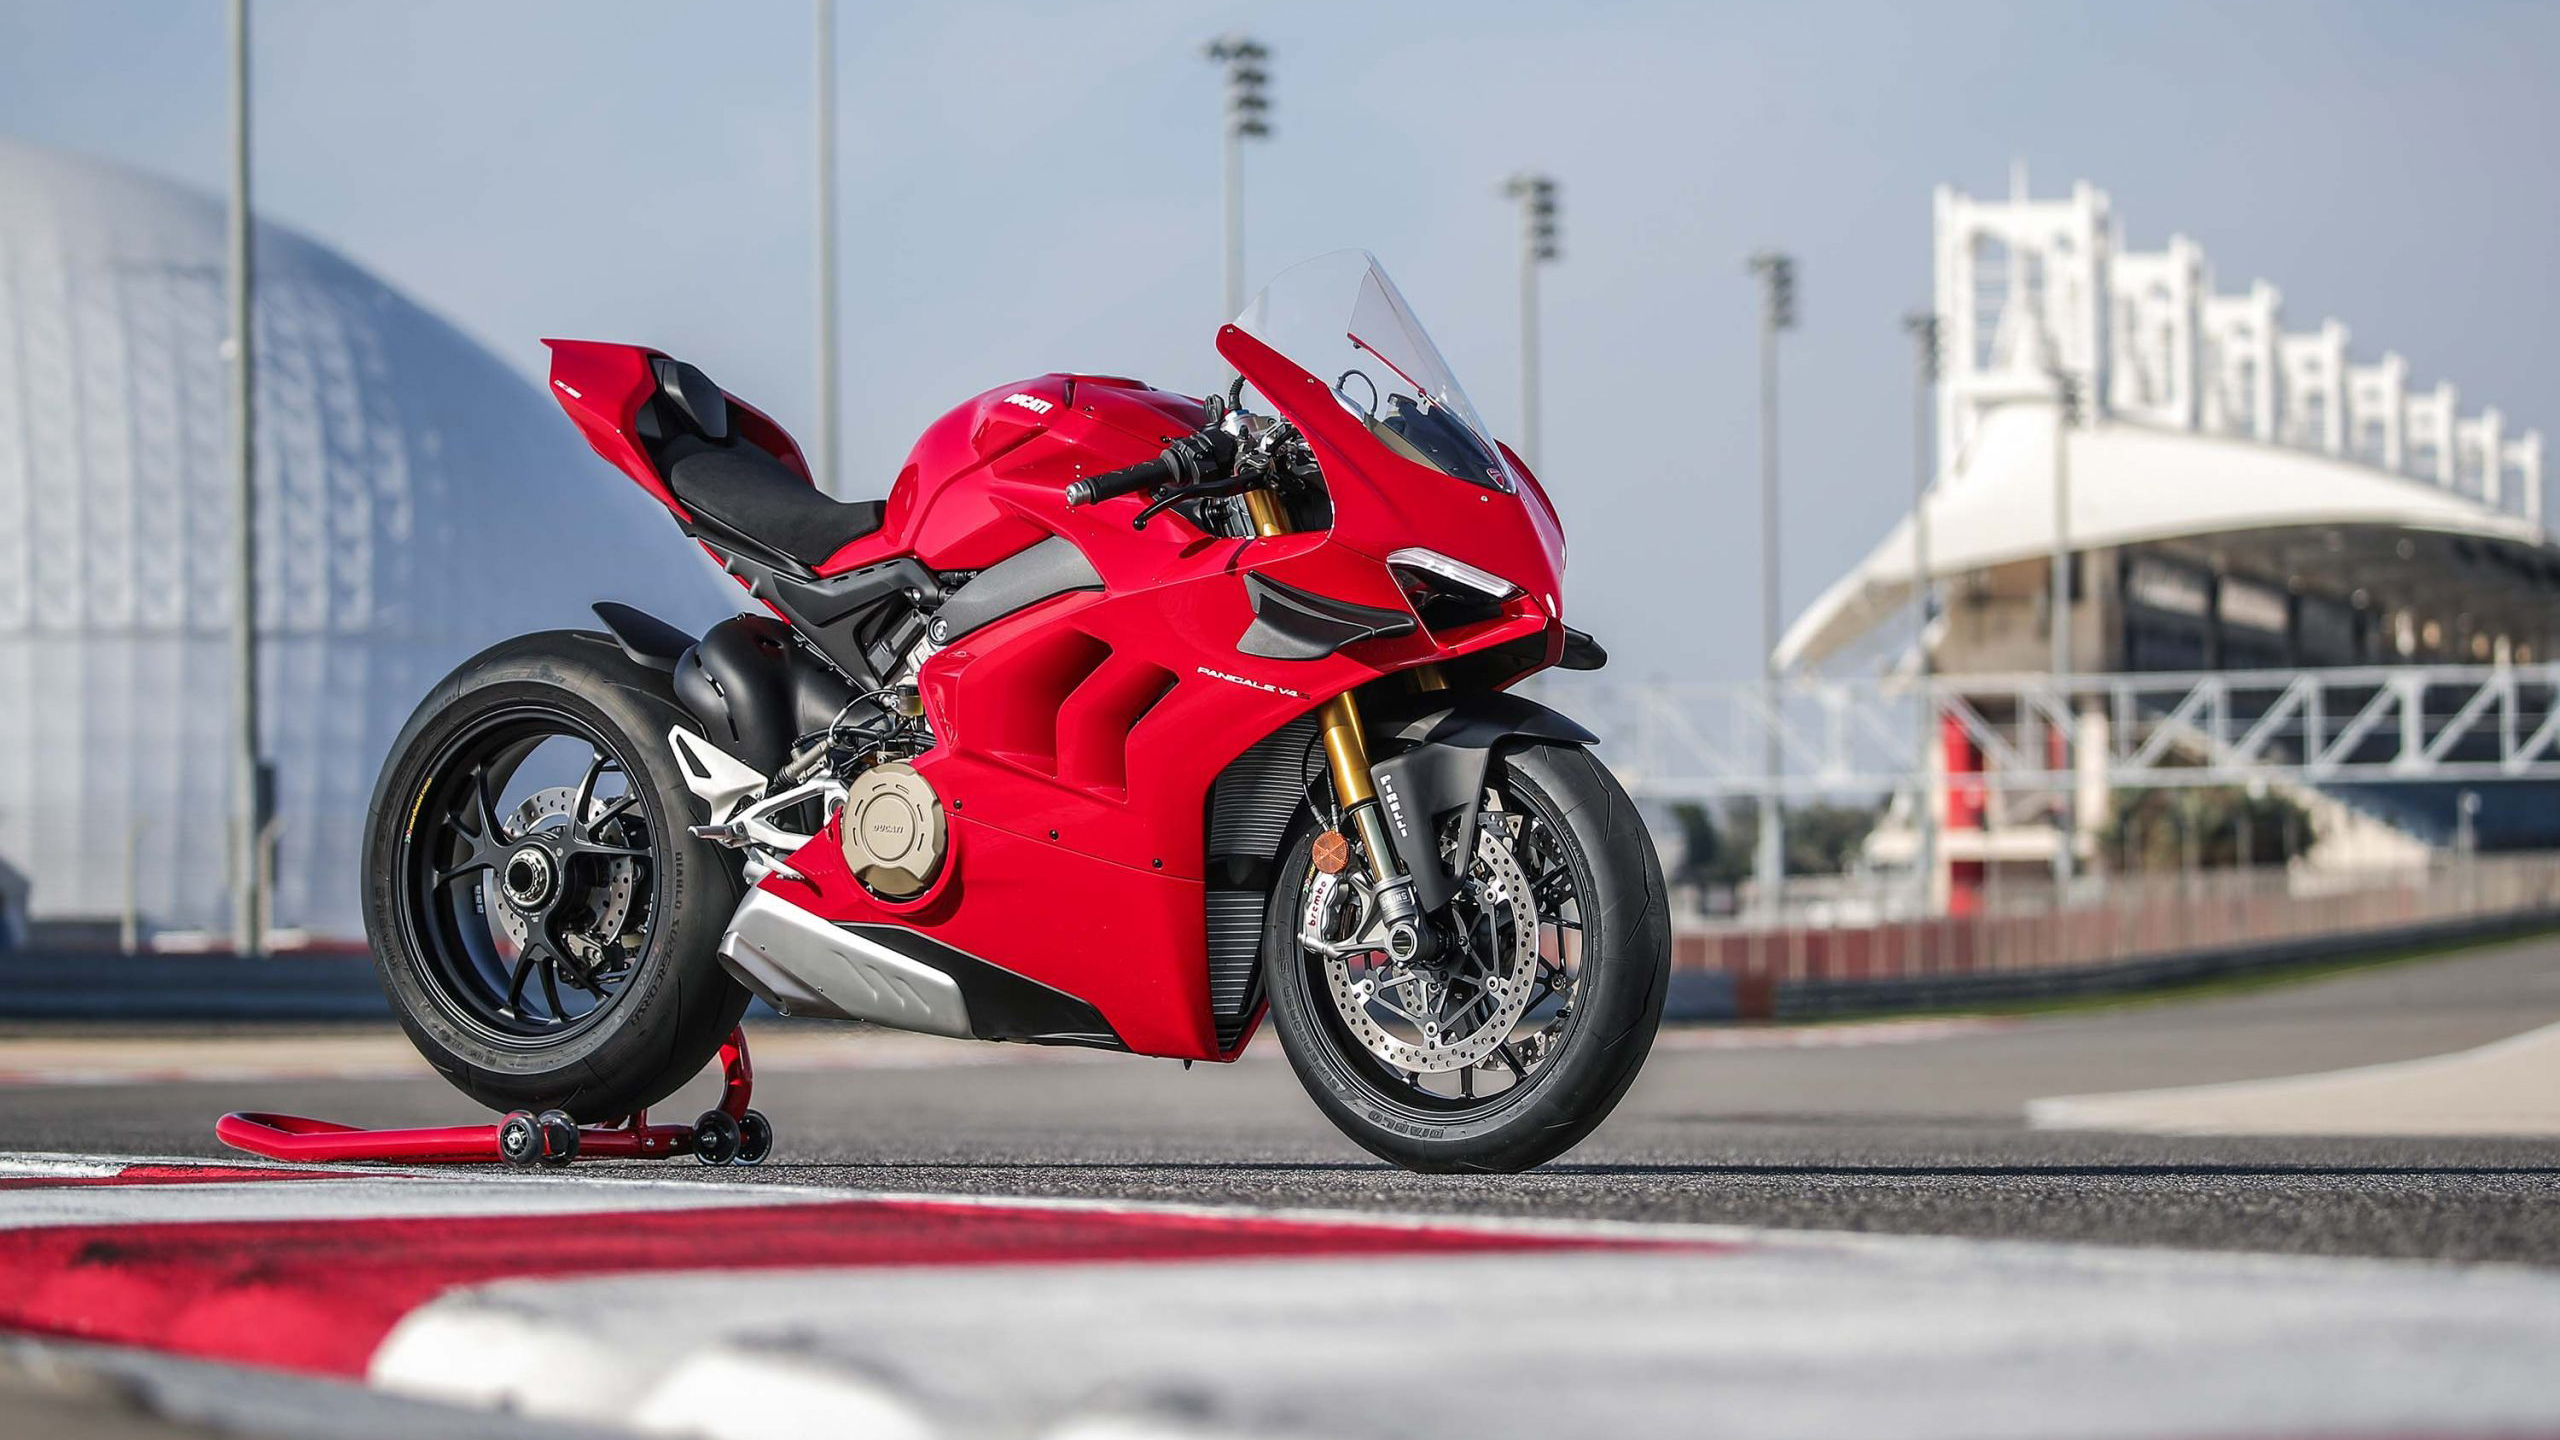 Red Ducati Panigale V4 S motorcycle, 2020 at the stadium Desktop wallpapers  1366x768